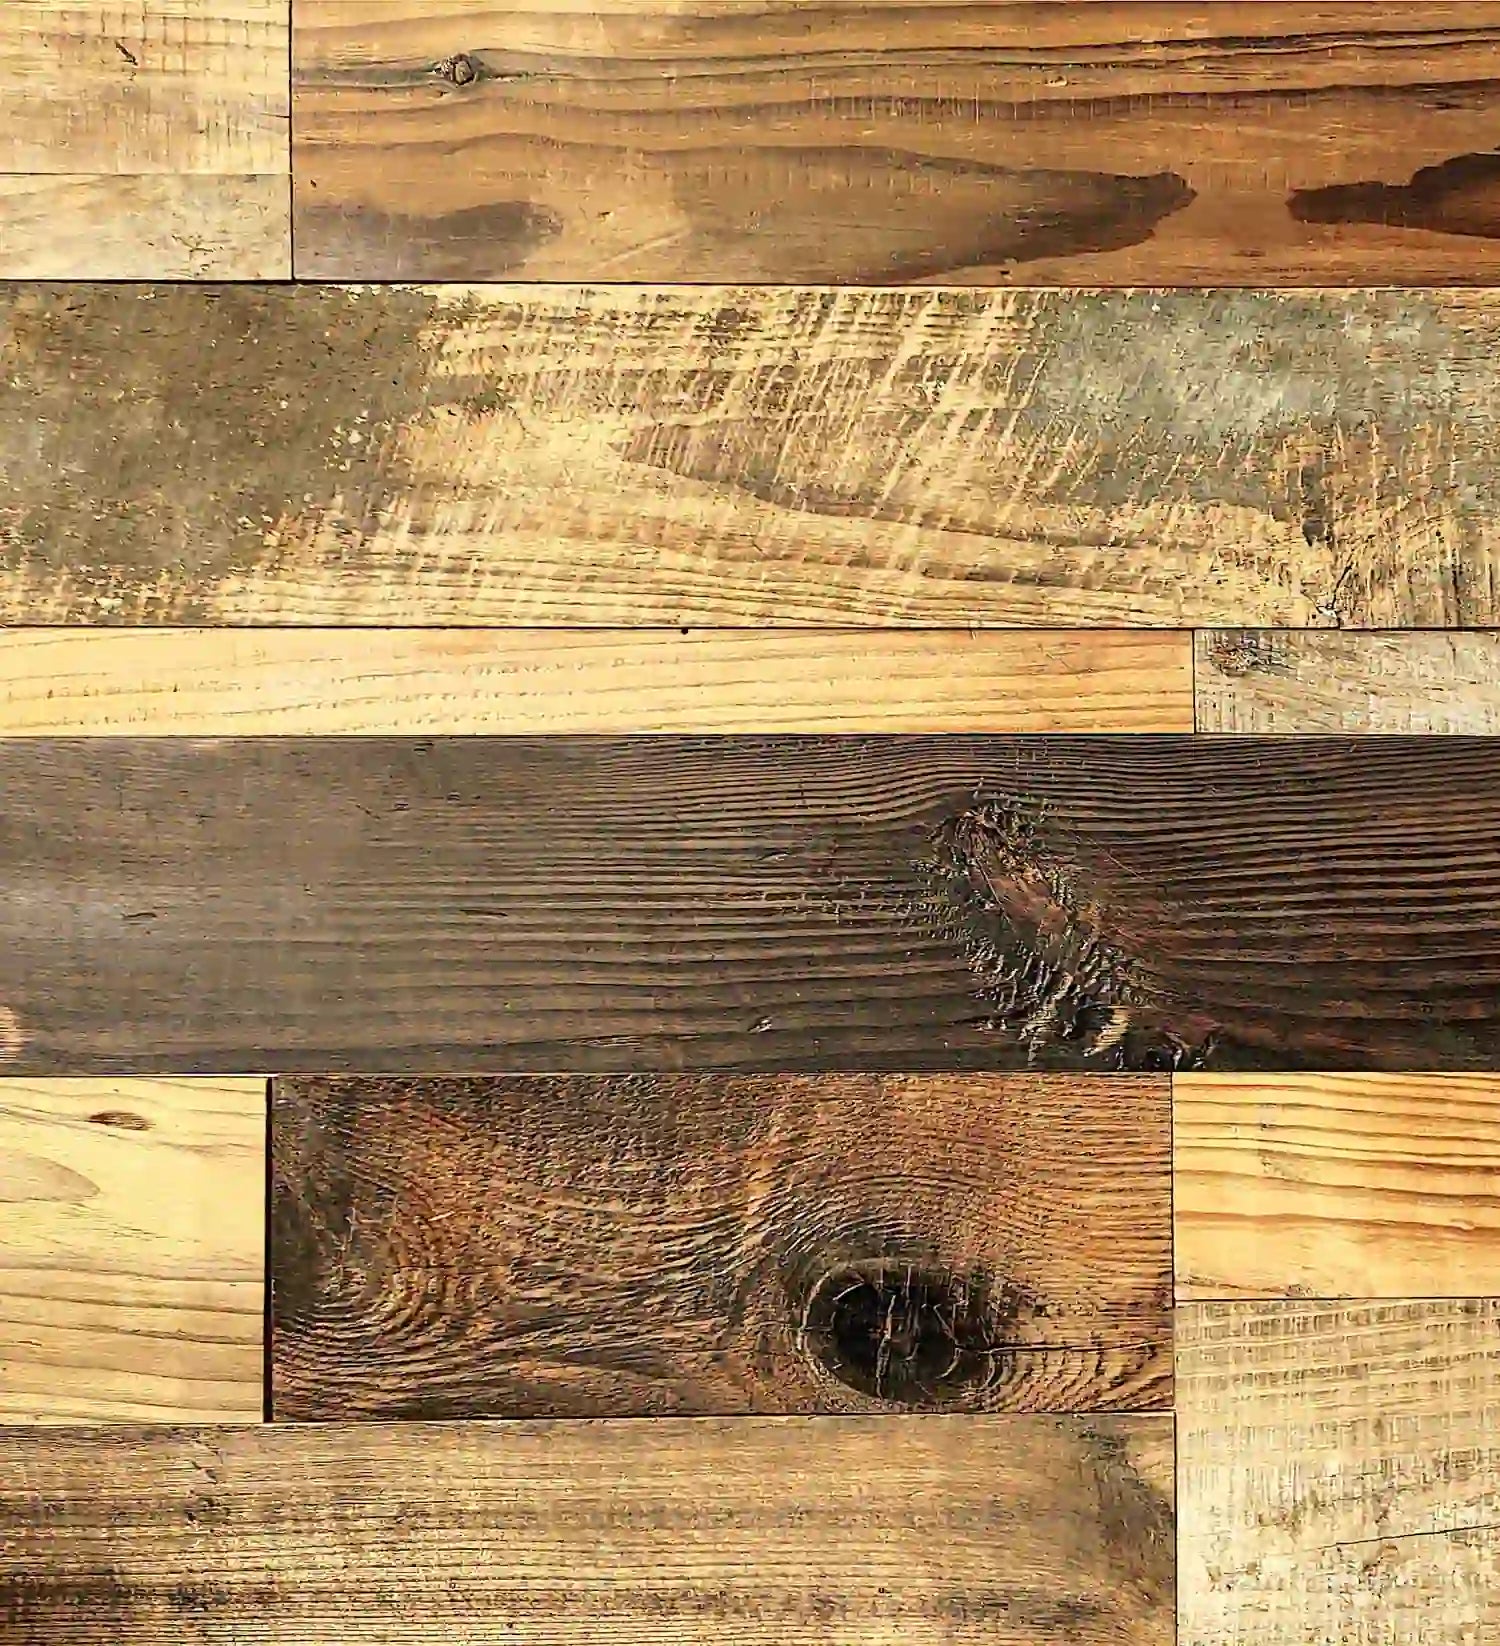 Reclaimed Wood Planks. Barn Wood Boards for DIY & Accent Walls. (12 pack)